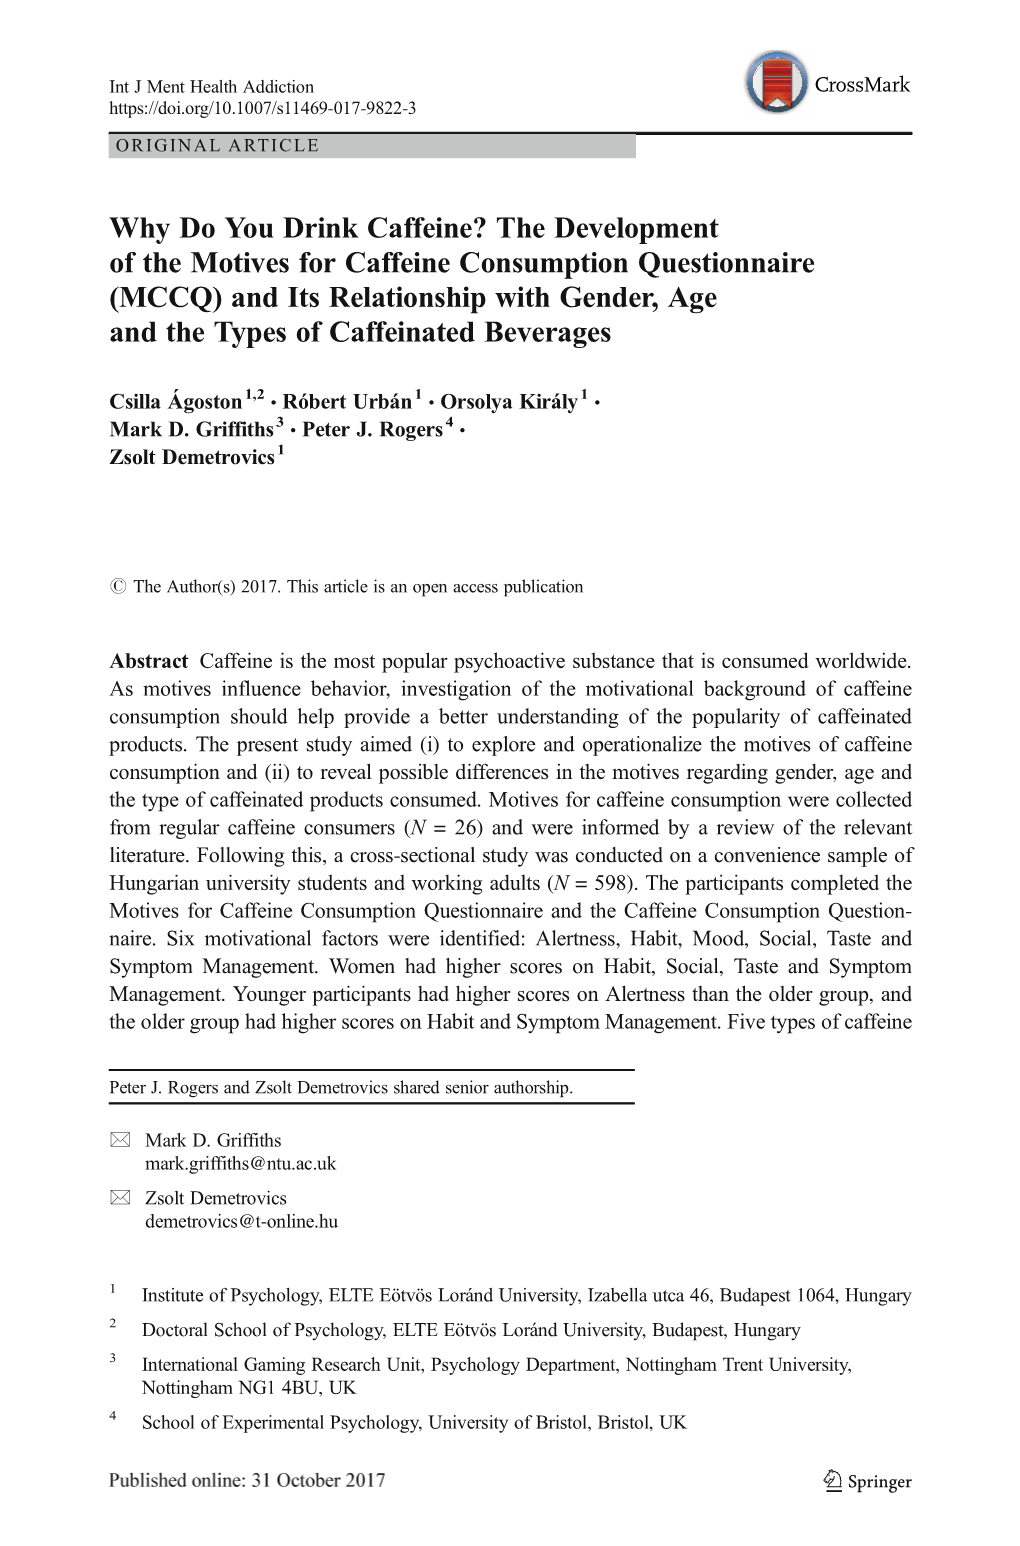 The Development of the Motives for Caffeine Consumption Questionnaire (MCCQ) and Its Relationship with Gender, Age and the Types of Caffeinated Beverages